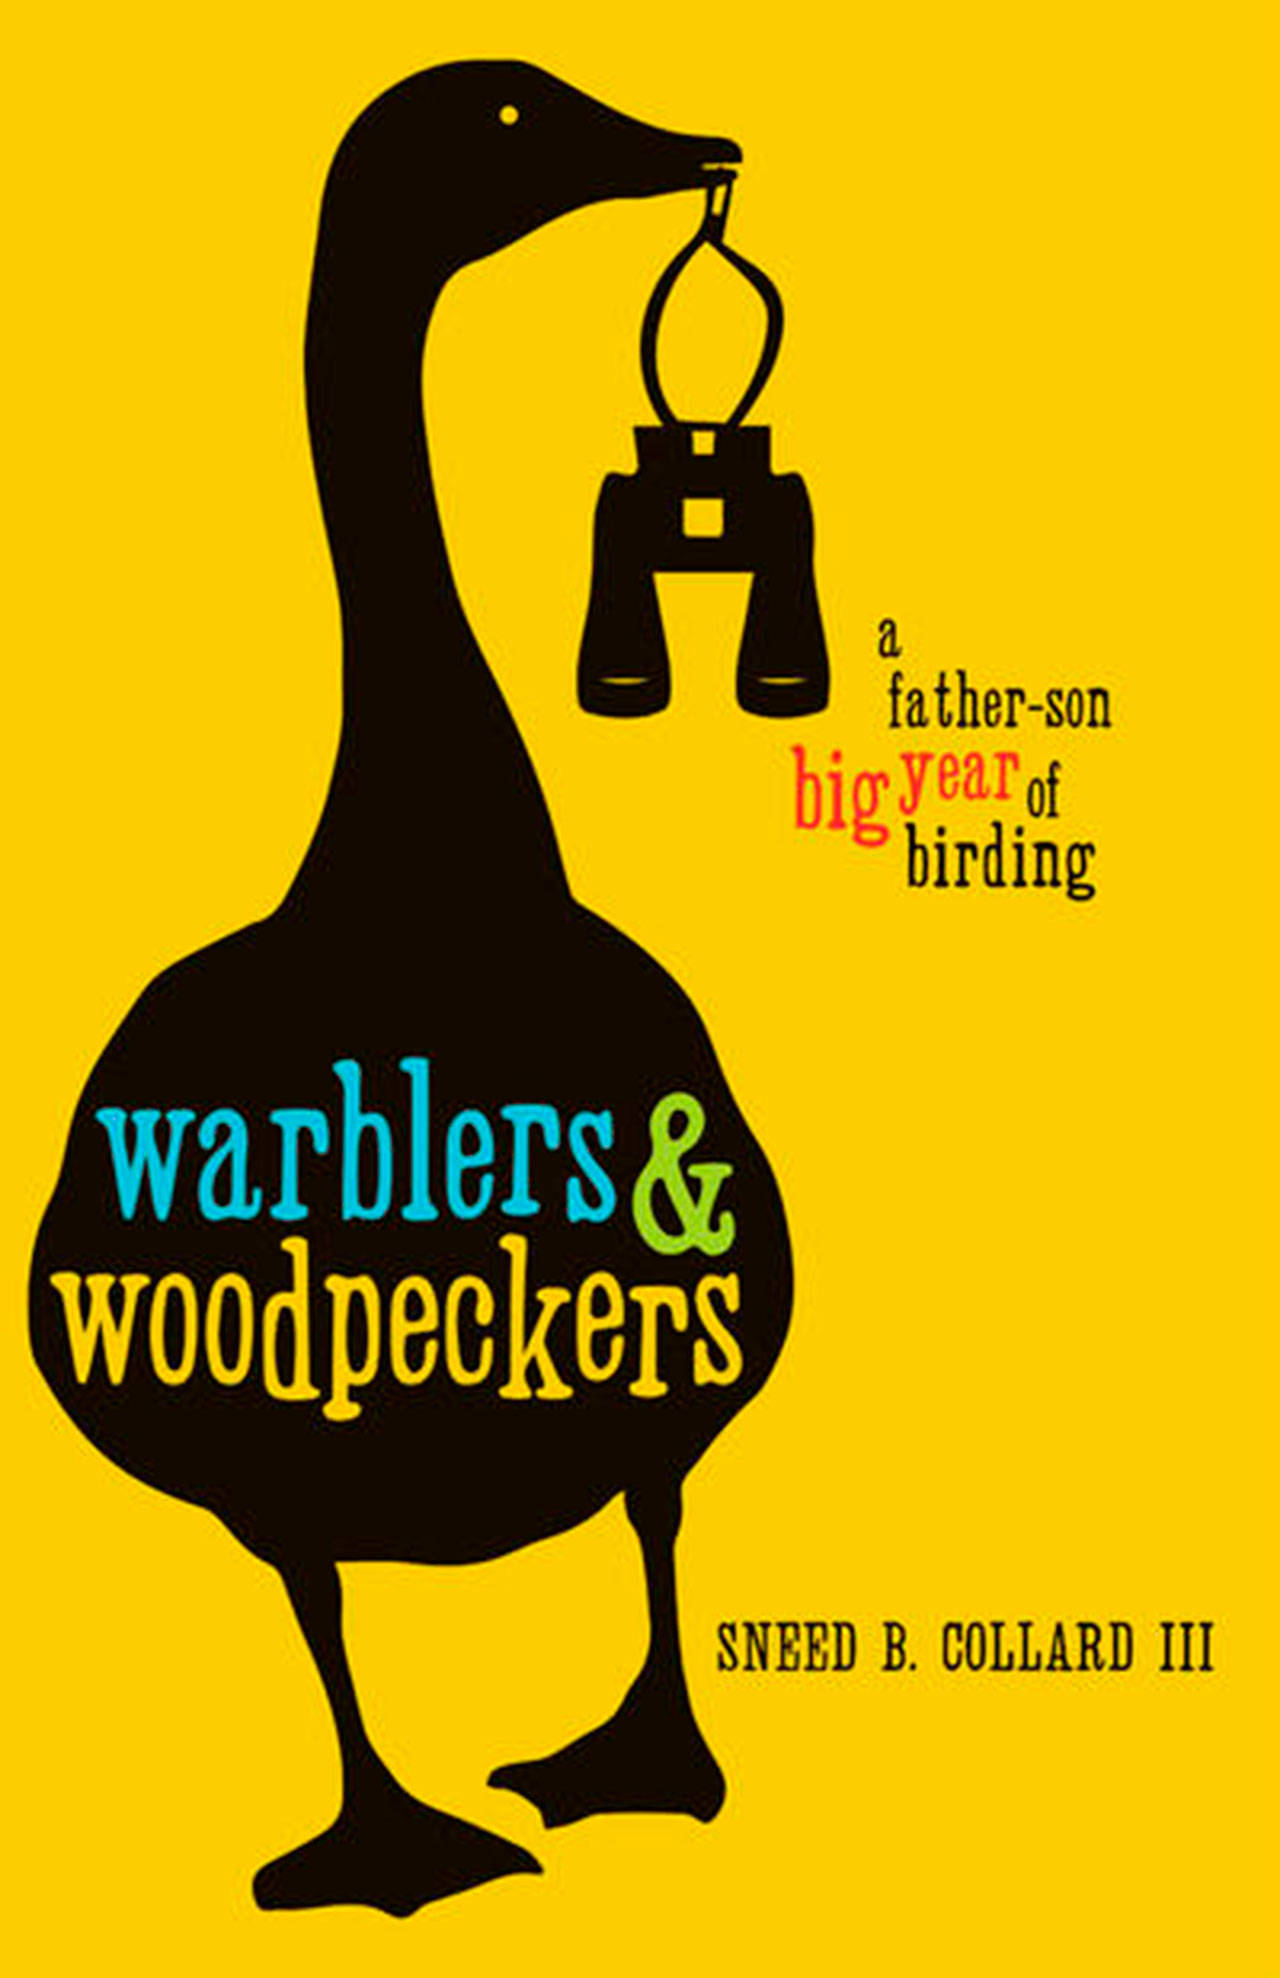 Image courtesy of Eagle Harbor Book Company | Sneed Collard will visit Eagle Harbor Book Company in downtown Winslow at 3 p.m. Sunday, Sept. 15 to discuss his book “Warblers & Woodpeckers: A Father-Son Big Year of Birding.”